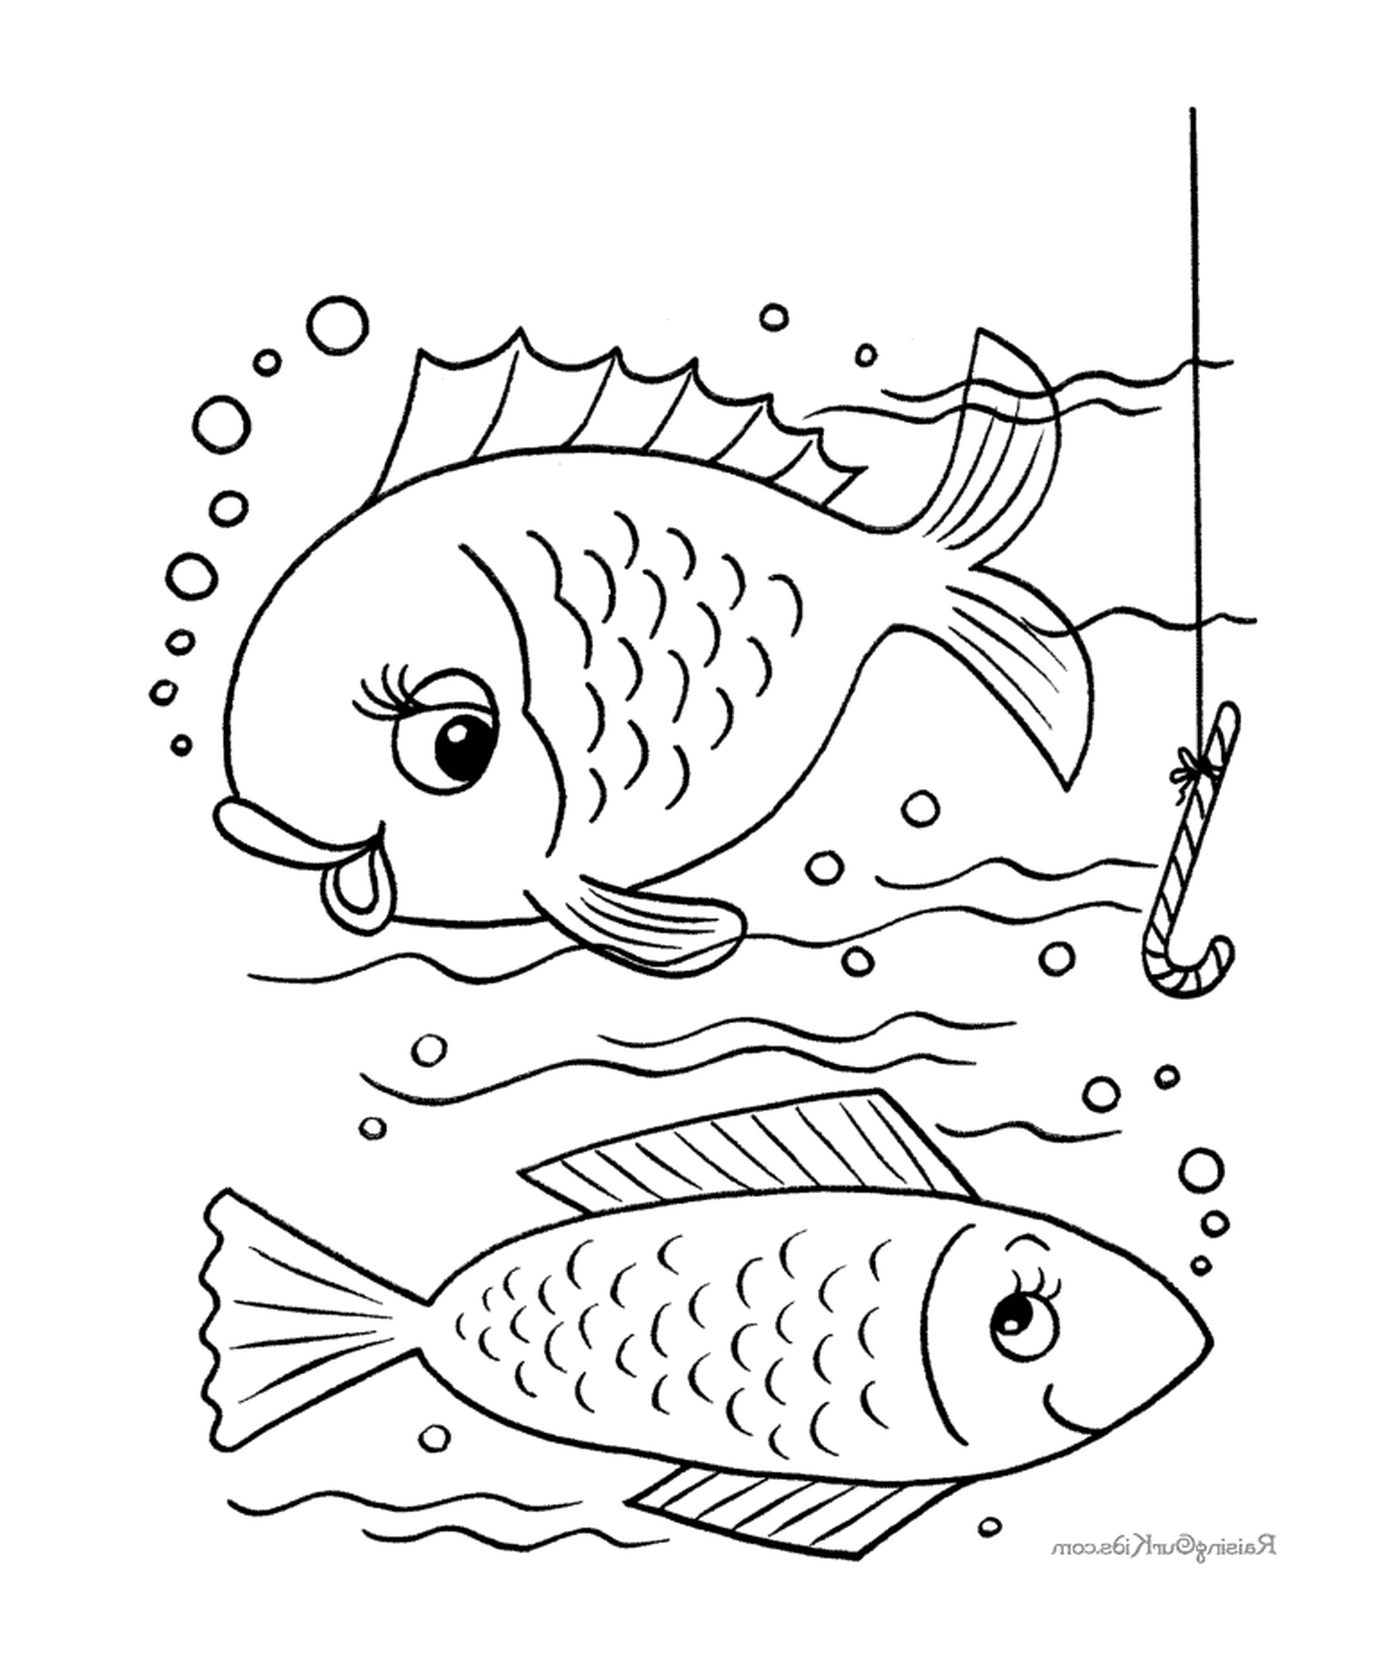  Two fish swim in the water while another fish 